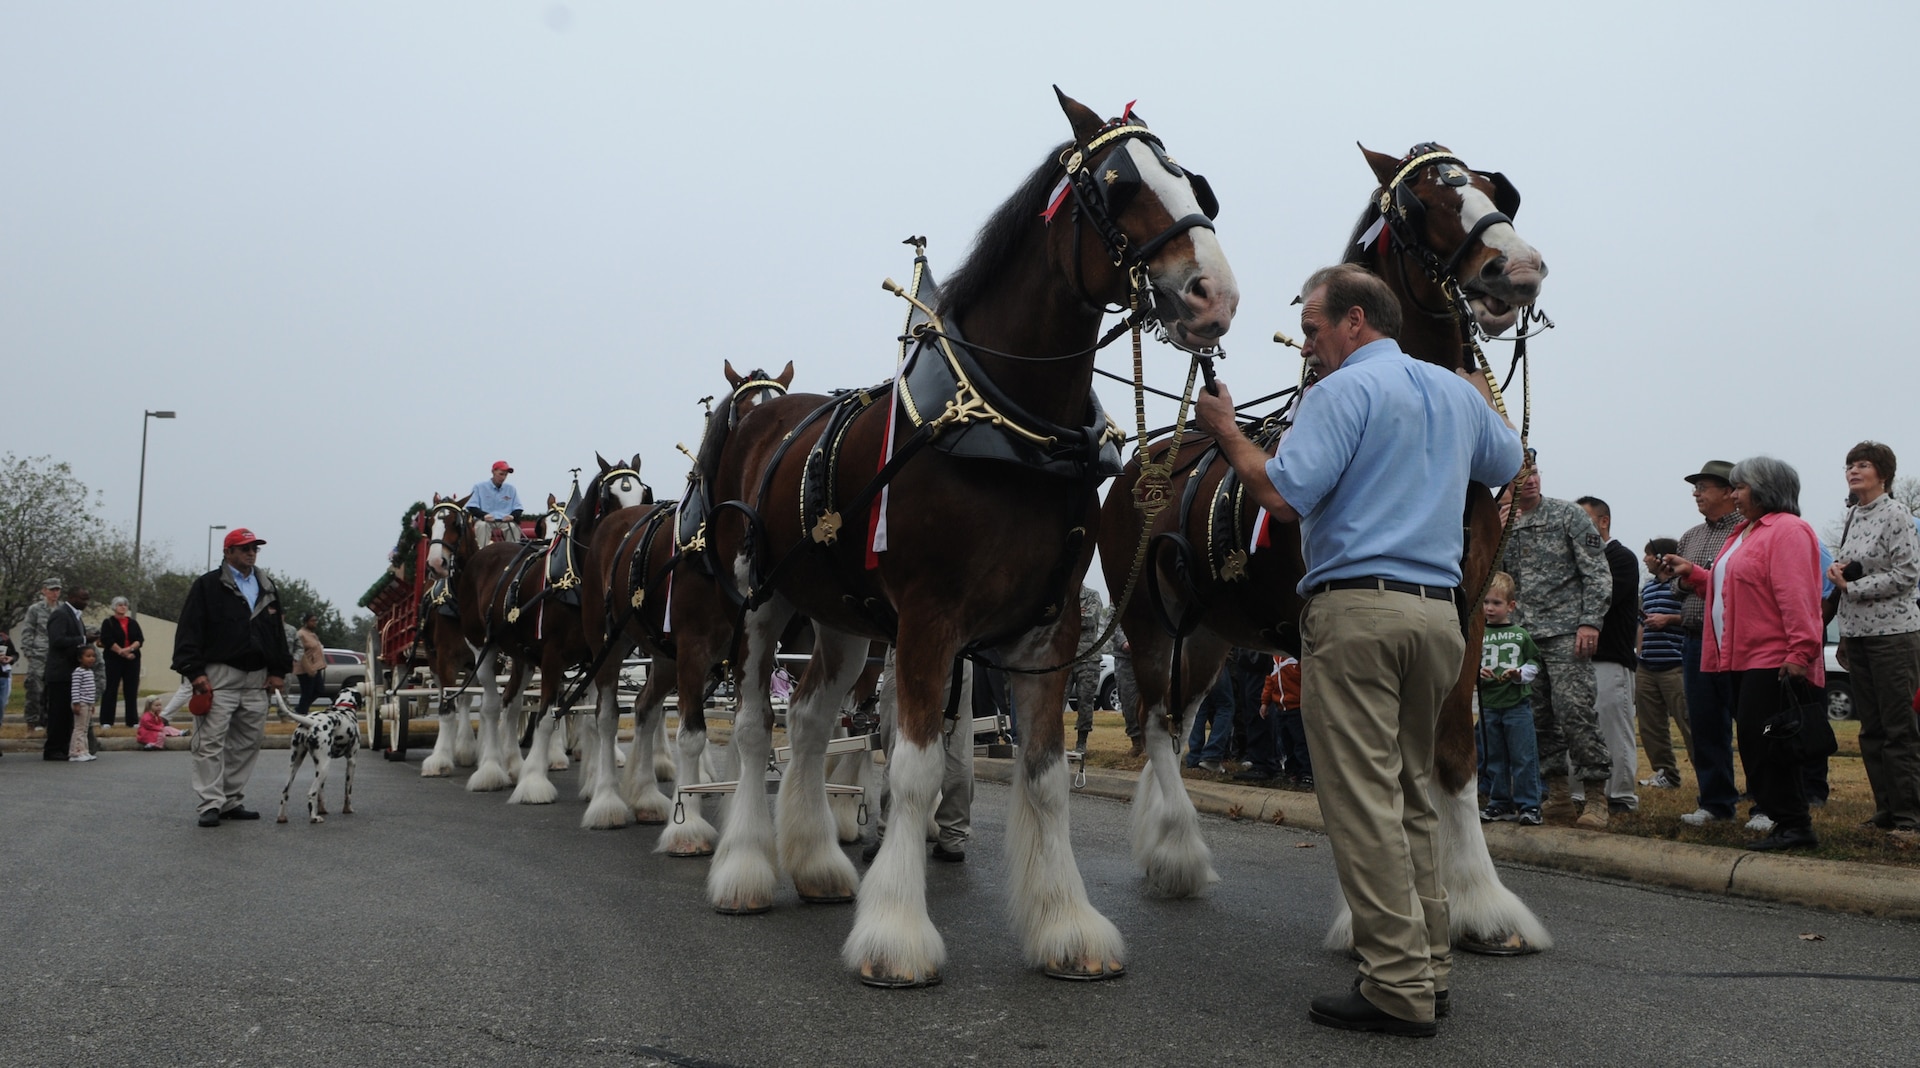 Friends, families and members of Team Randolph gathered at the base exchange Dec. 18 to catch a glimpse of the famous Clydesdale horses used for promotions and commercials by the Anheuser-Busch Brewing Company. (Photo by Rich McFadden)